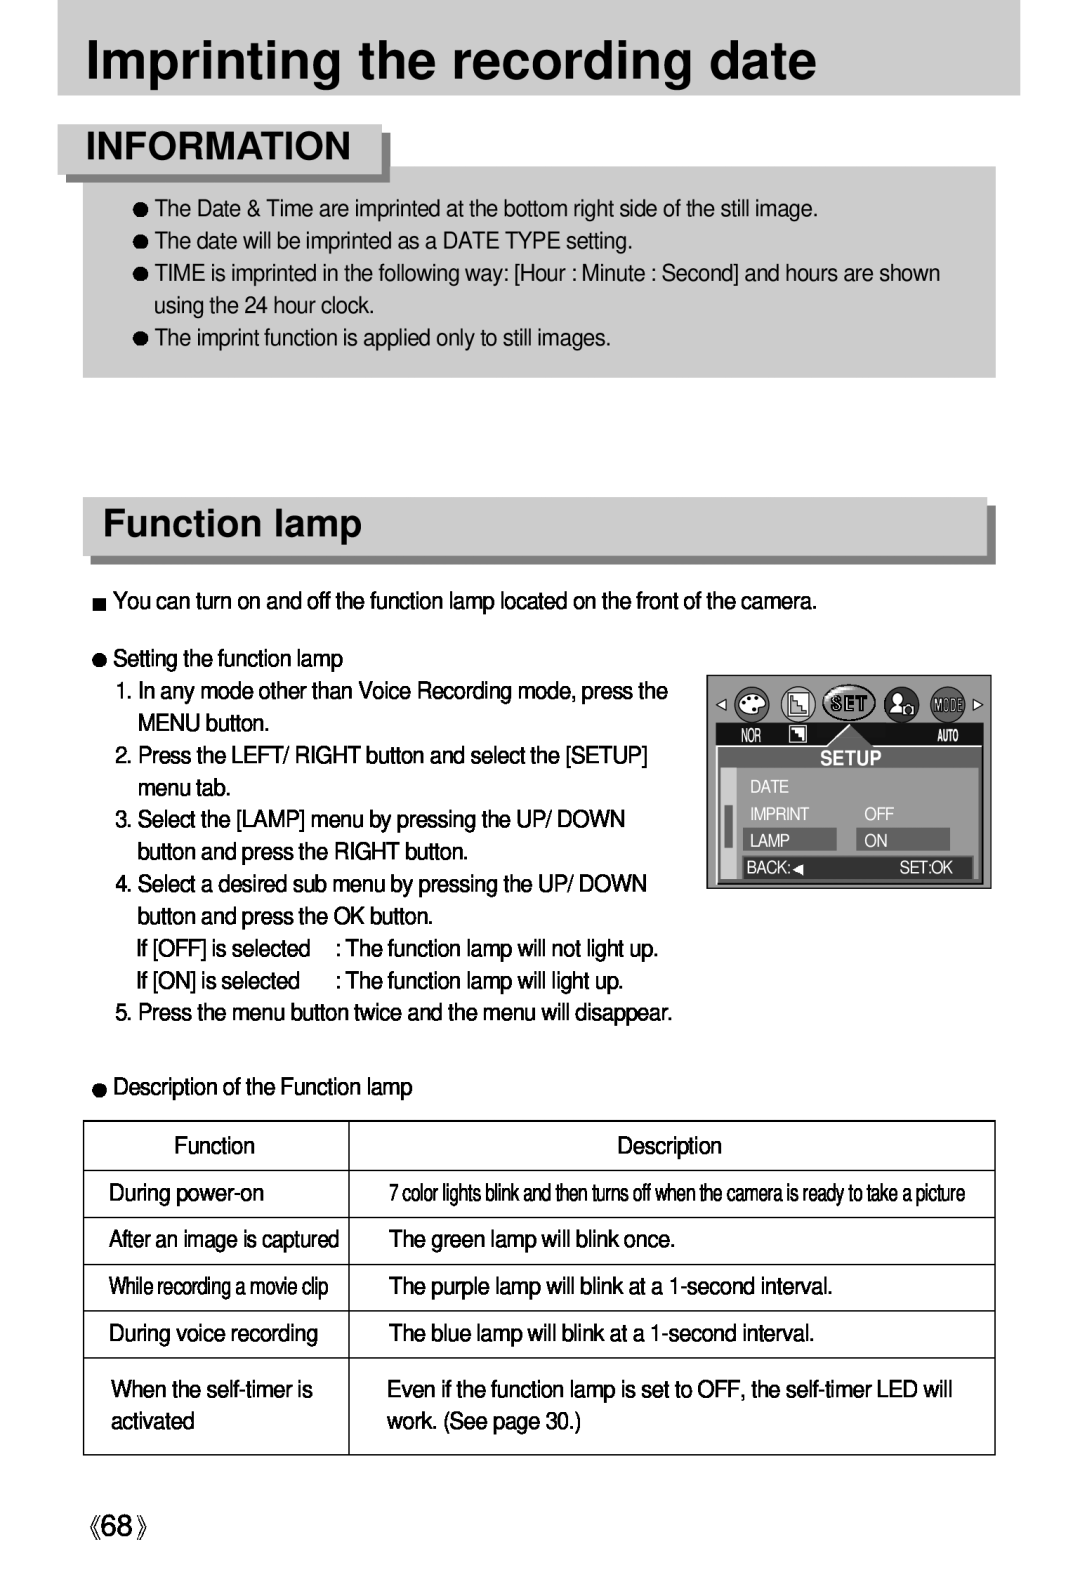 Samsung Digimax U-CA user manual Imprinting the recording date, Function lamp, Information, During voice recording 